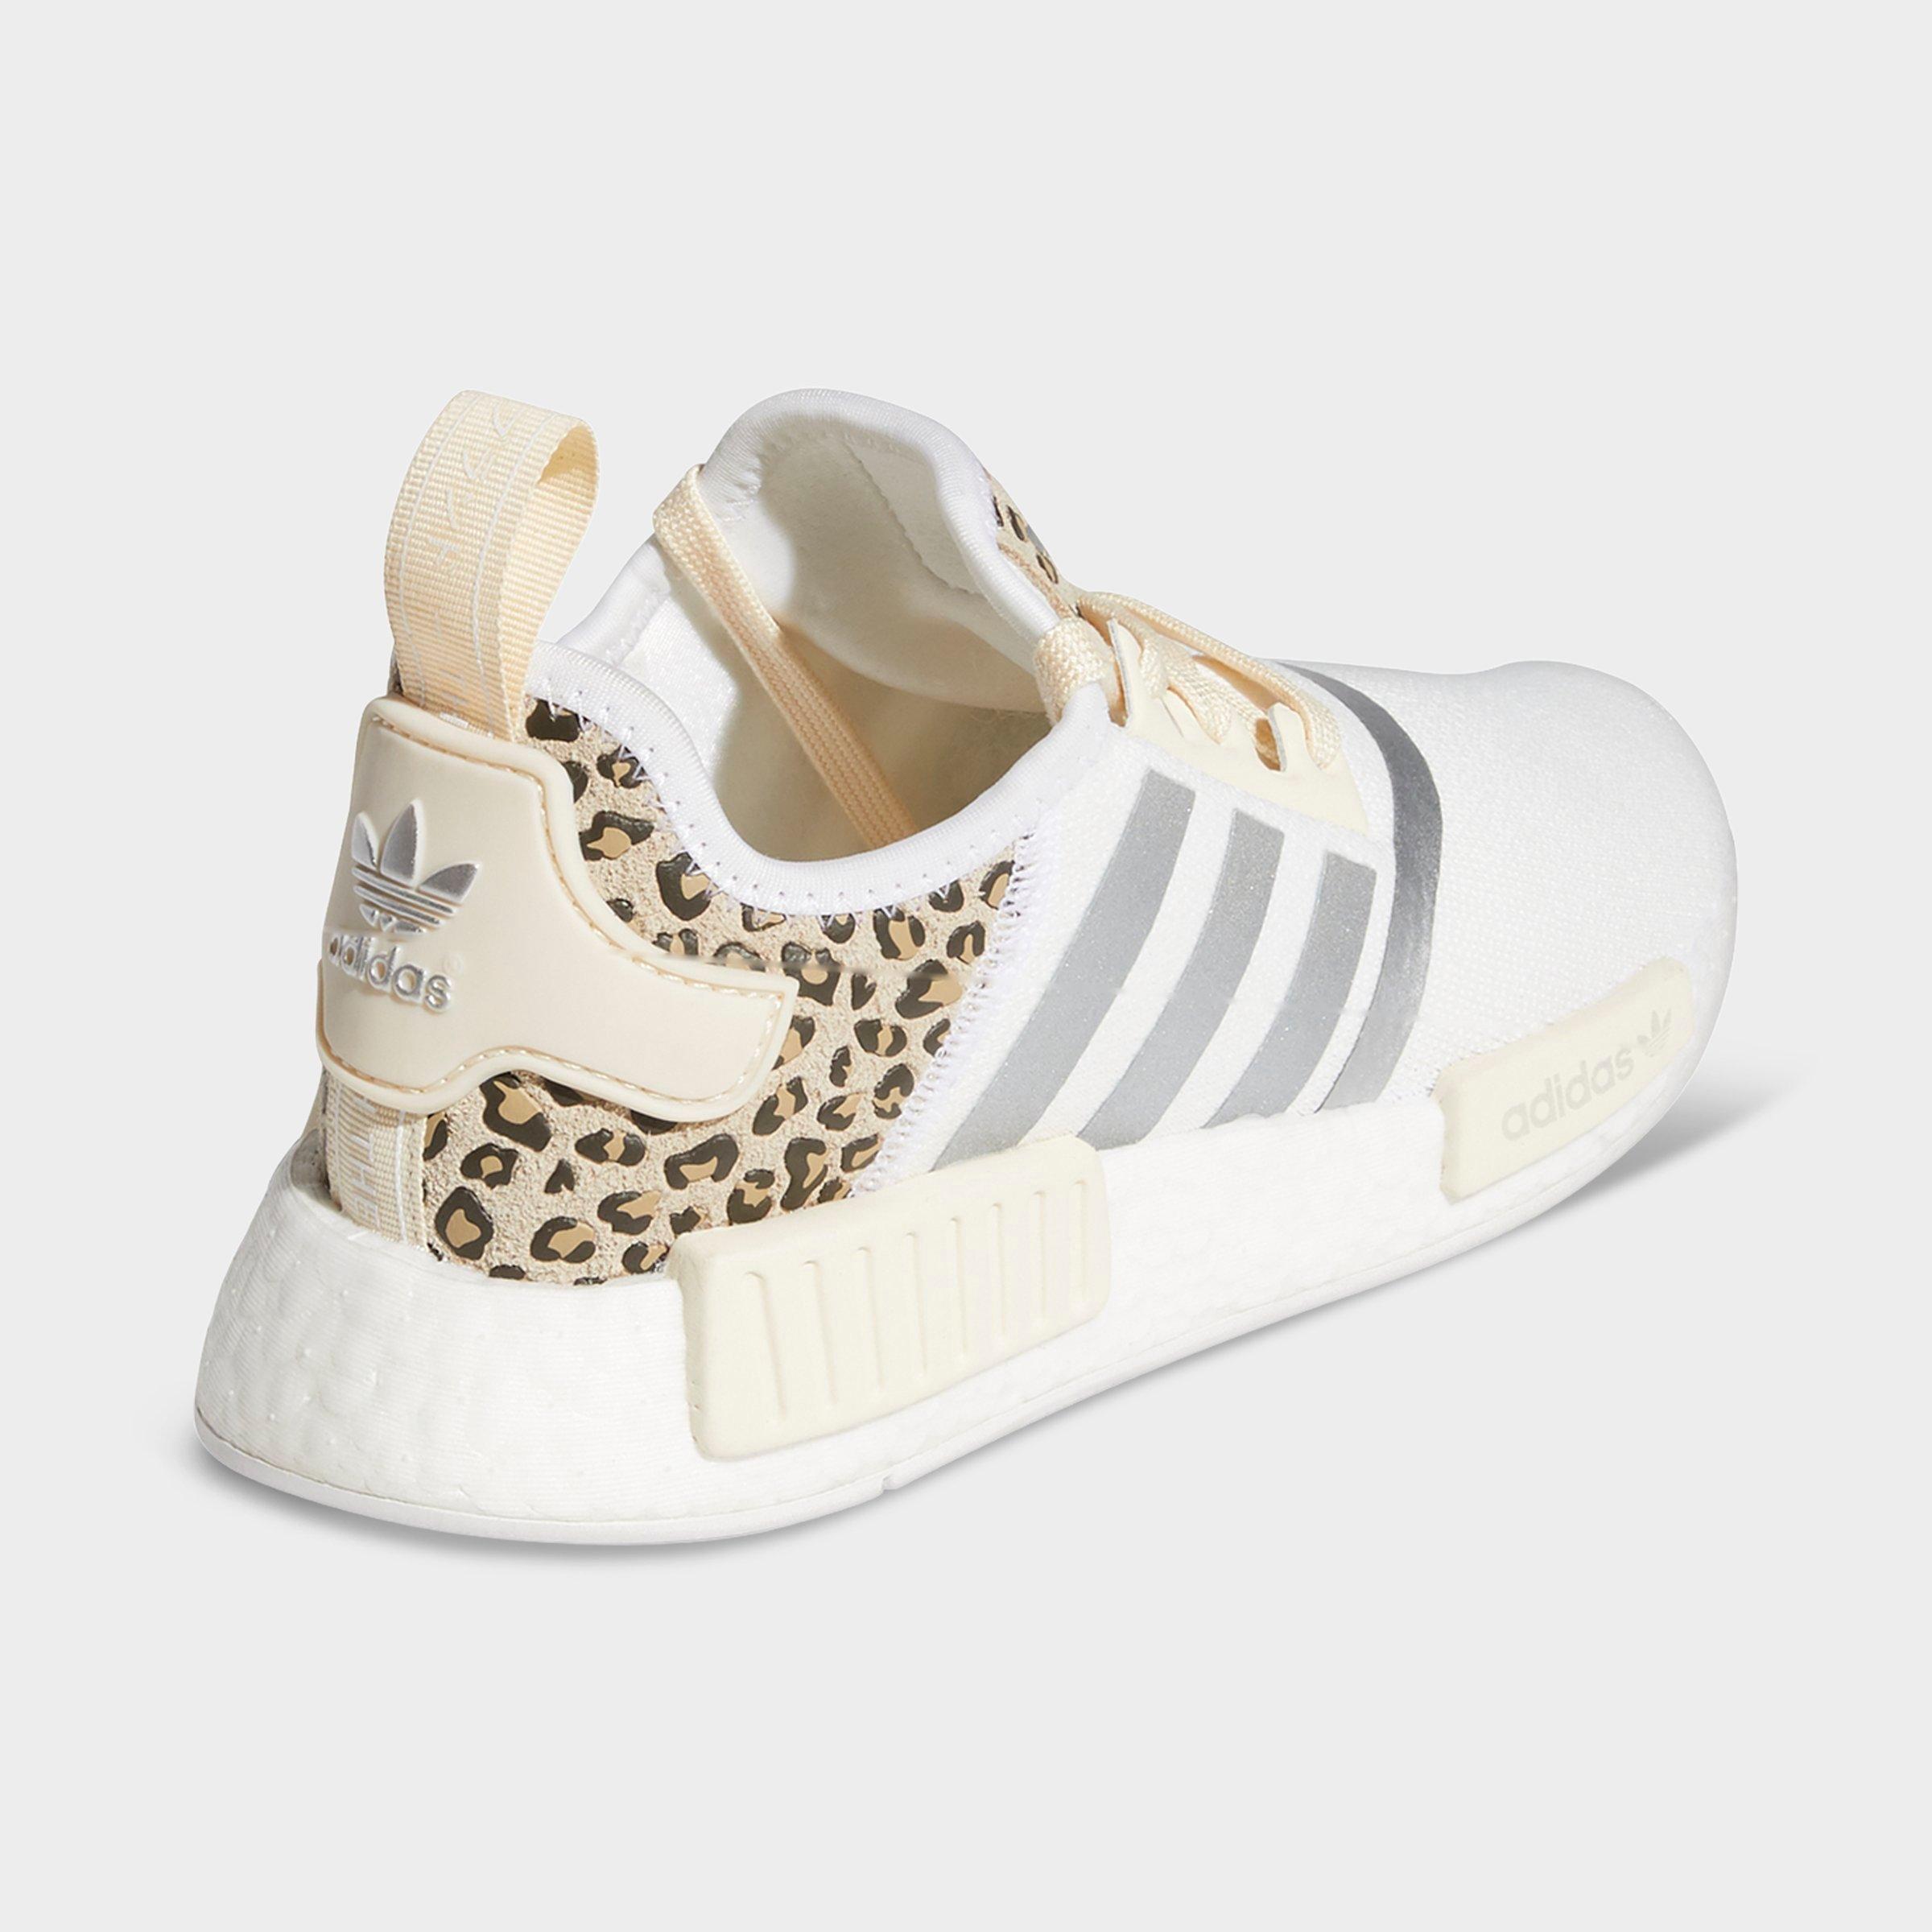 nmd r1 womens shoes